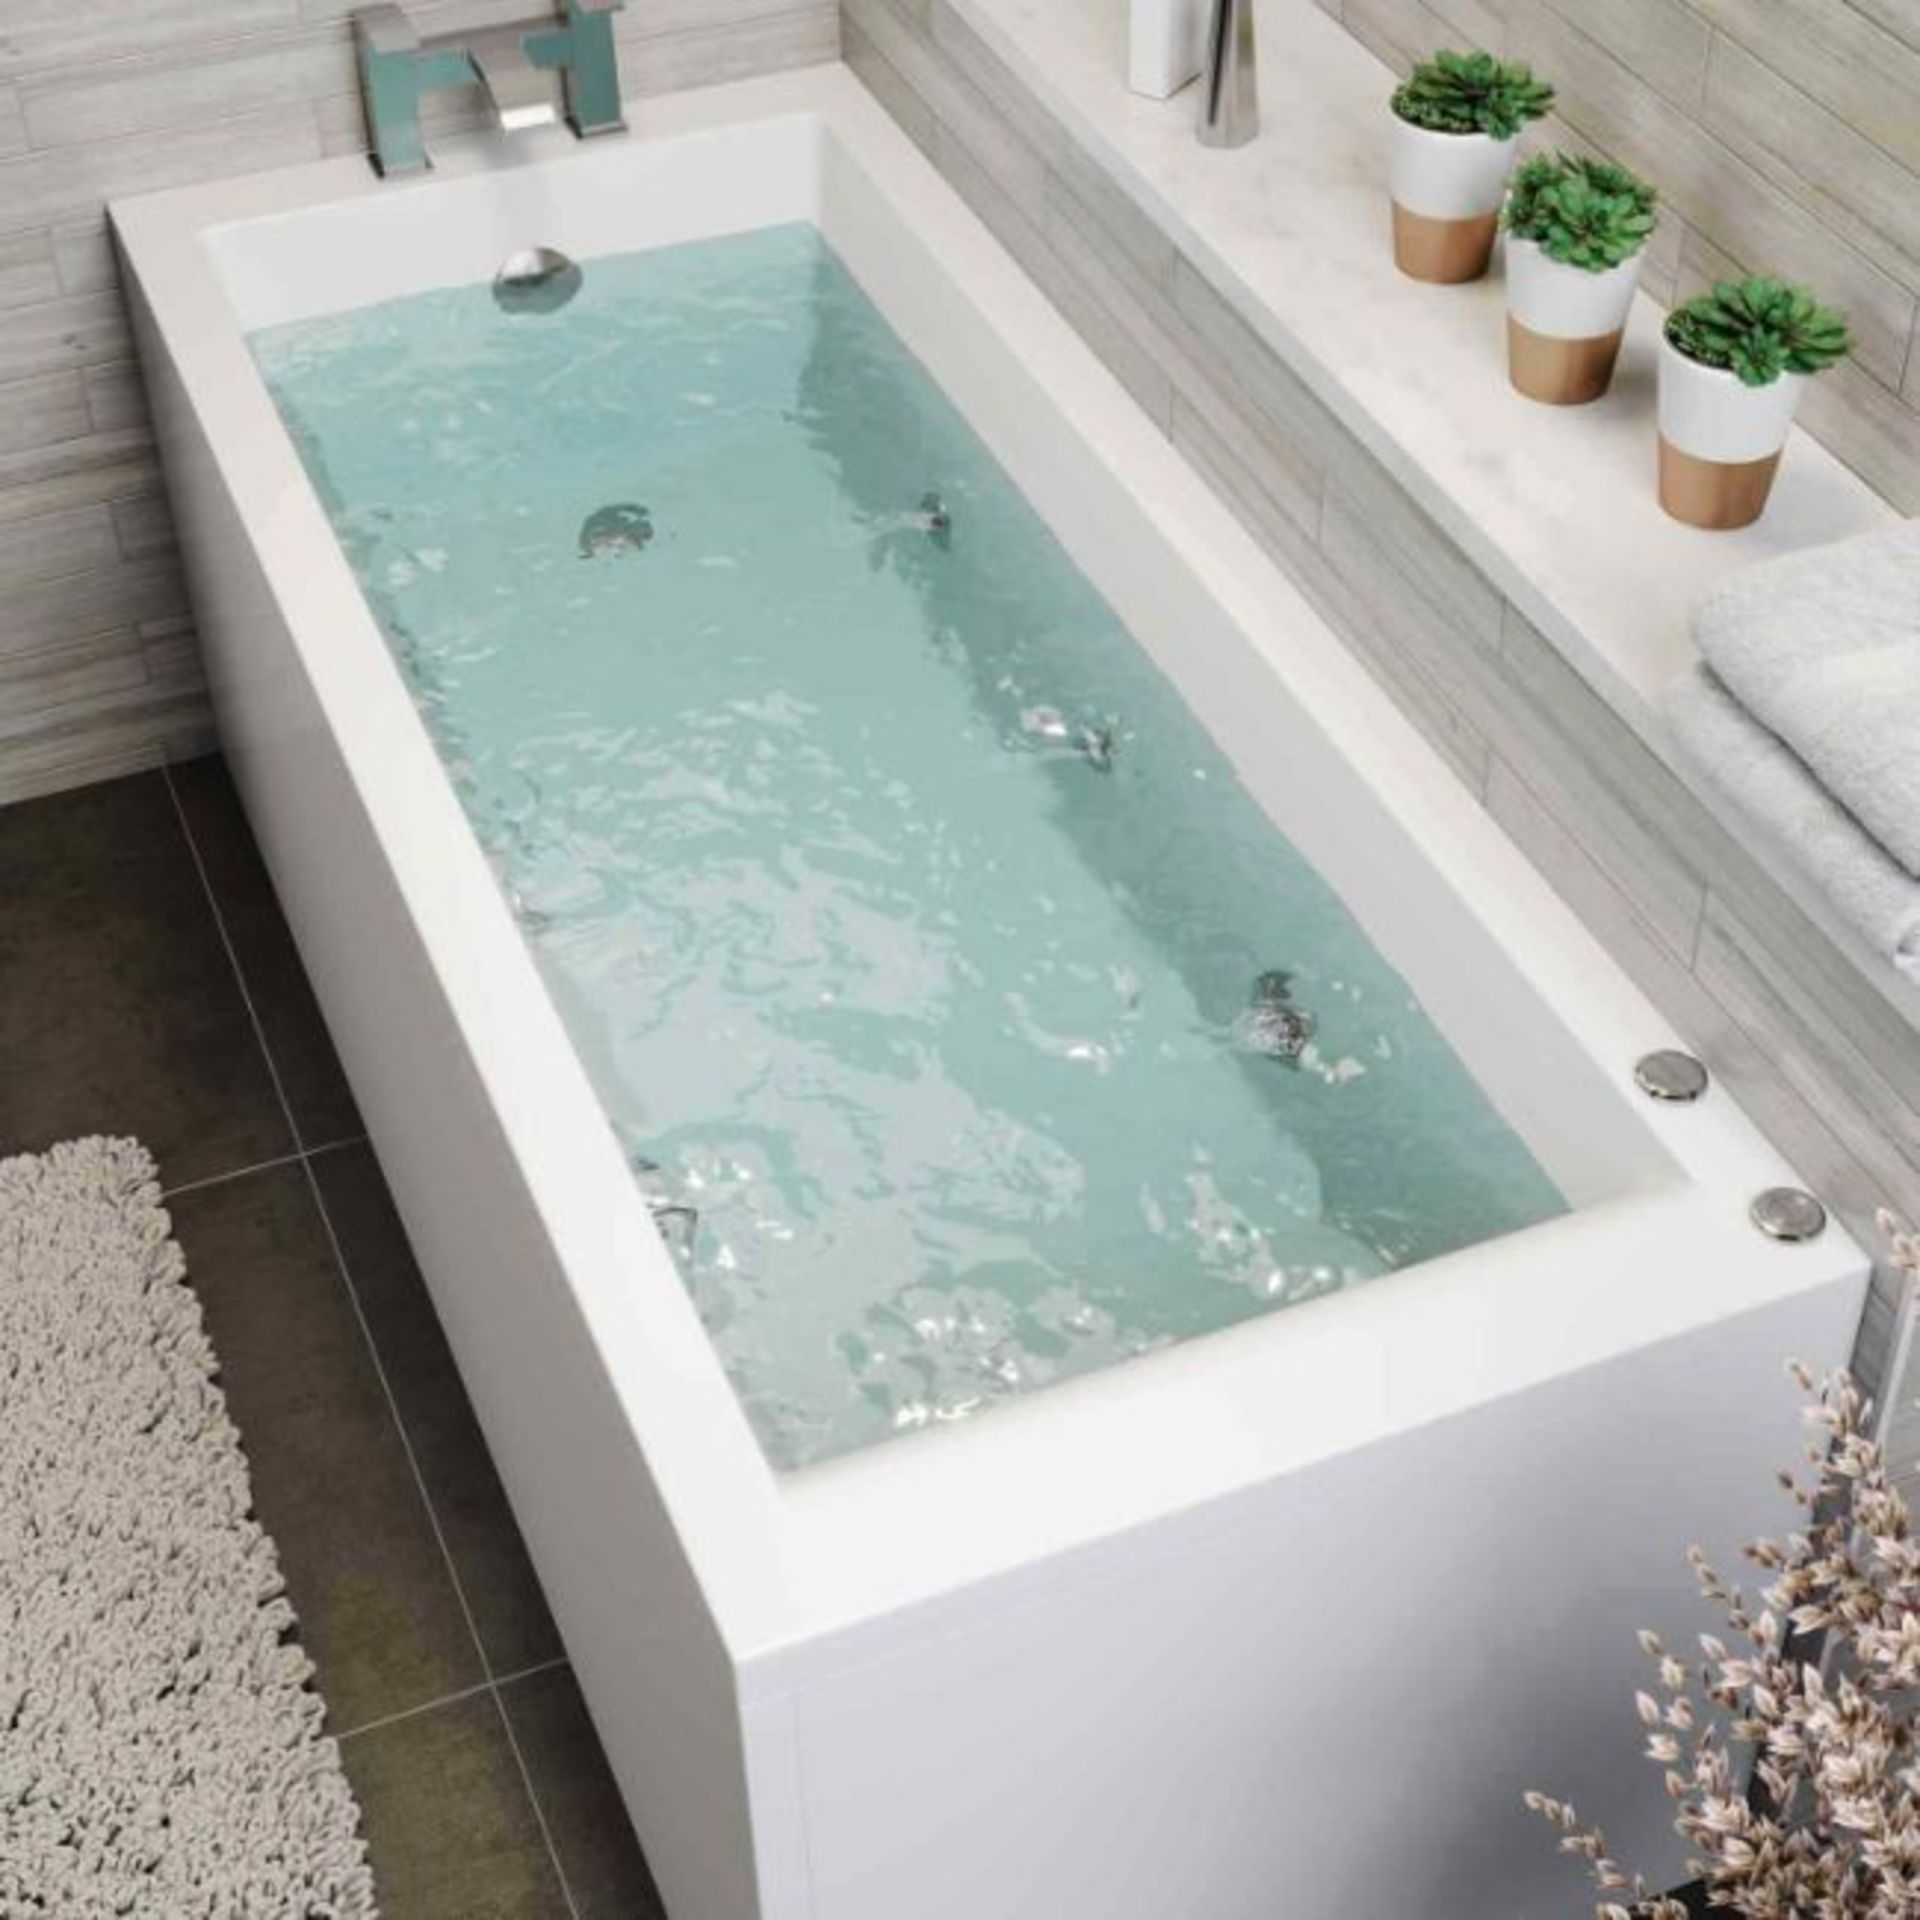 NEW 1700x700x545mm Whirlpool Jucuzzi Single Ended Bath - 6 Jets. RRP £1,299.99.Spa Exper... - Image 3 of 3